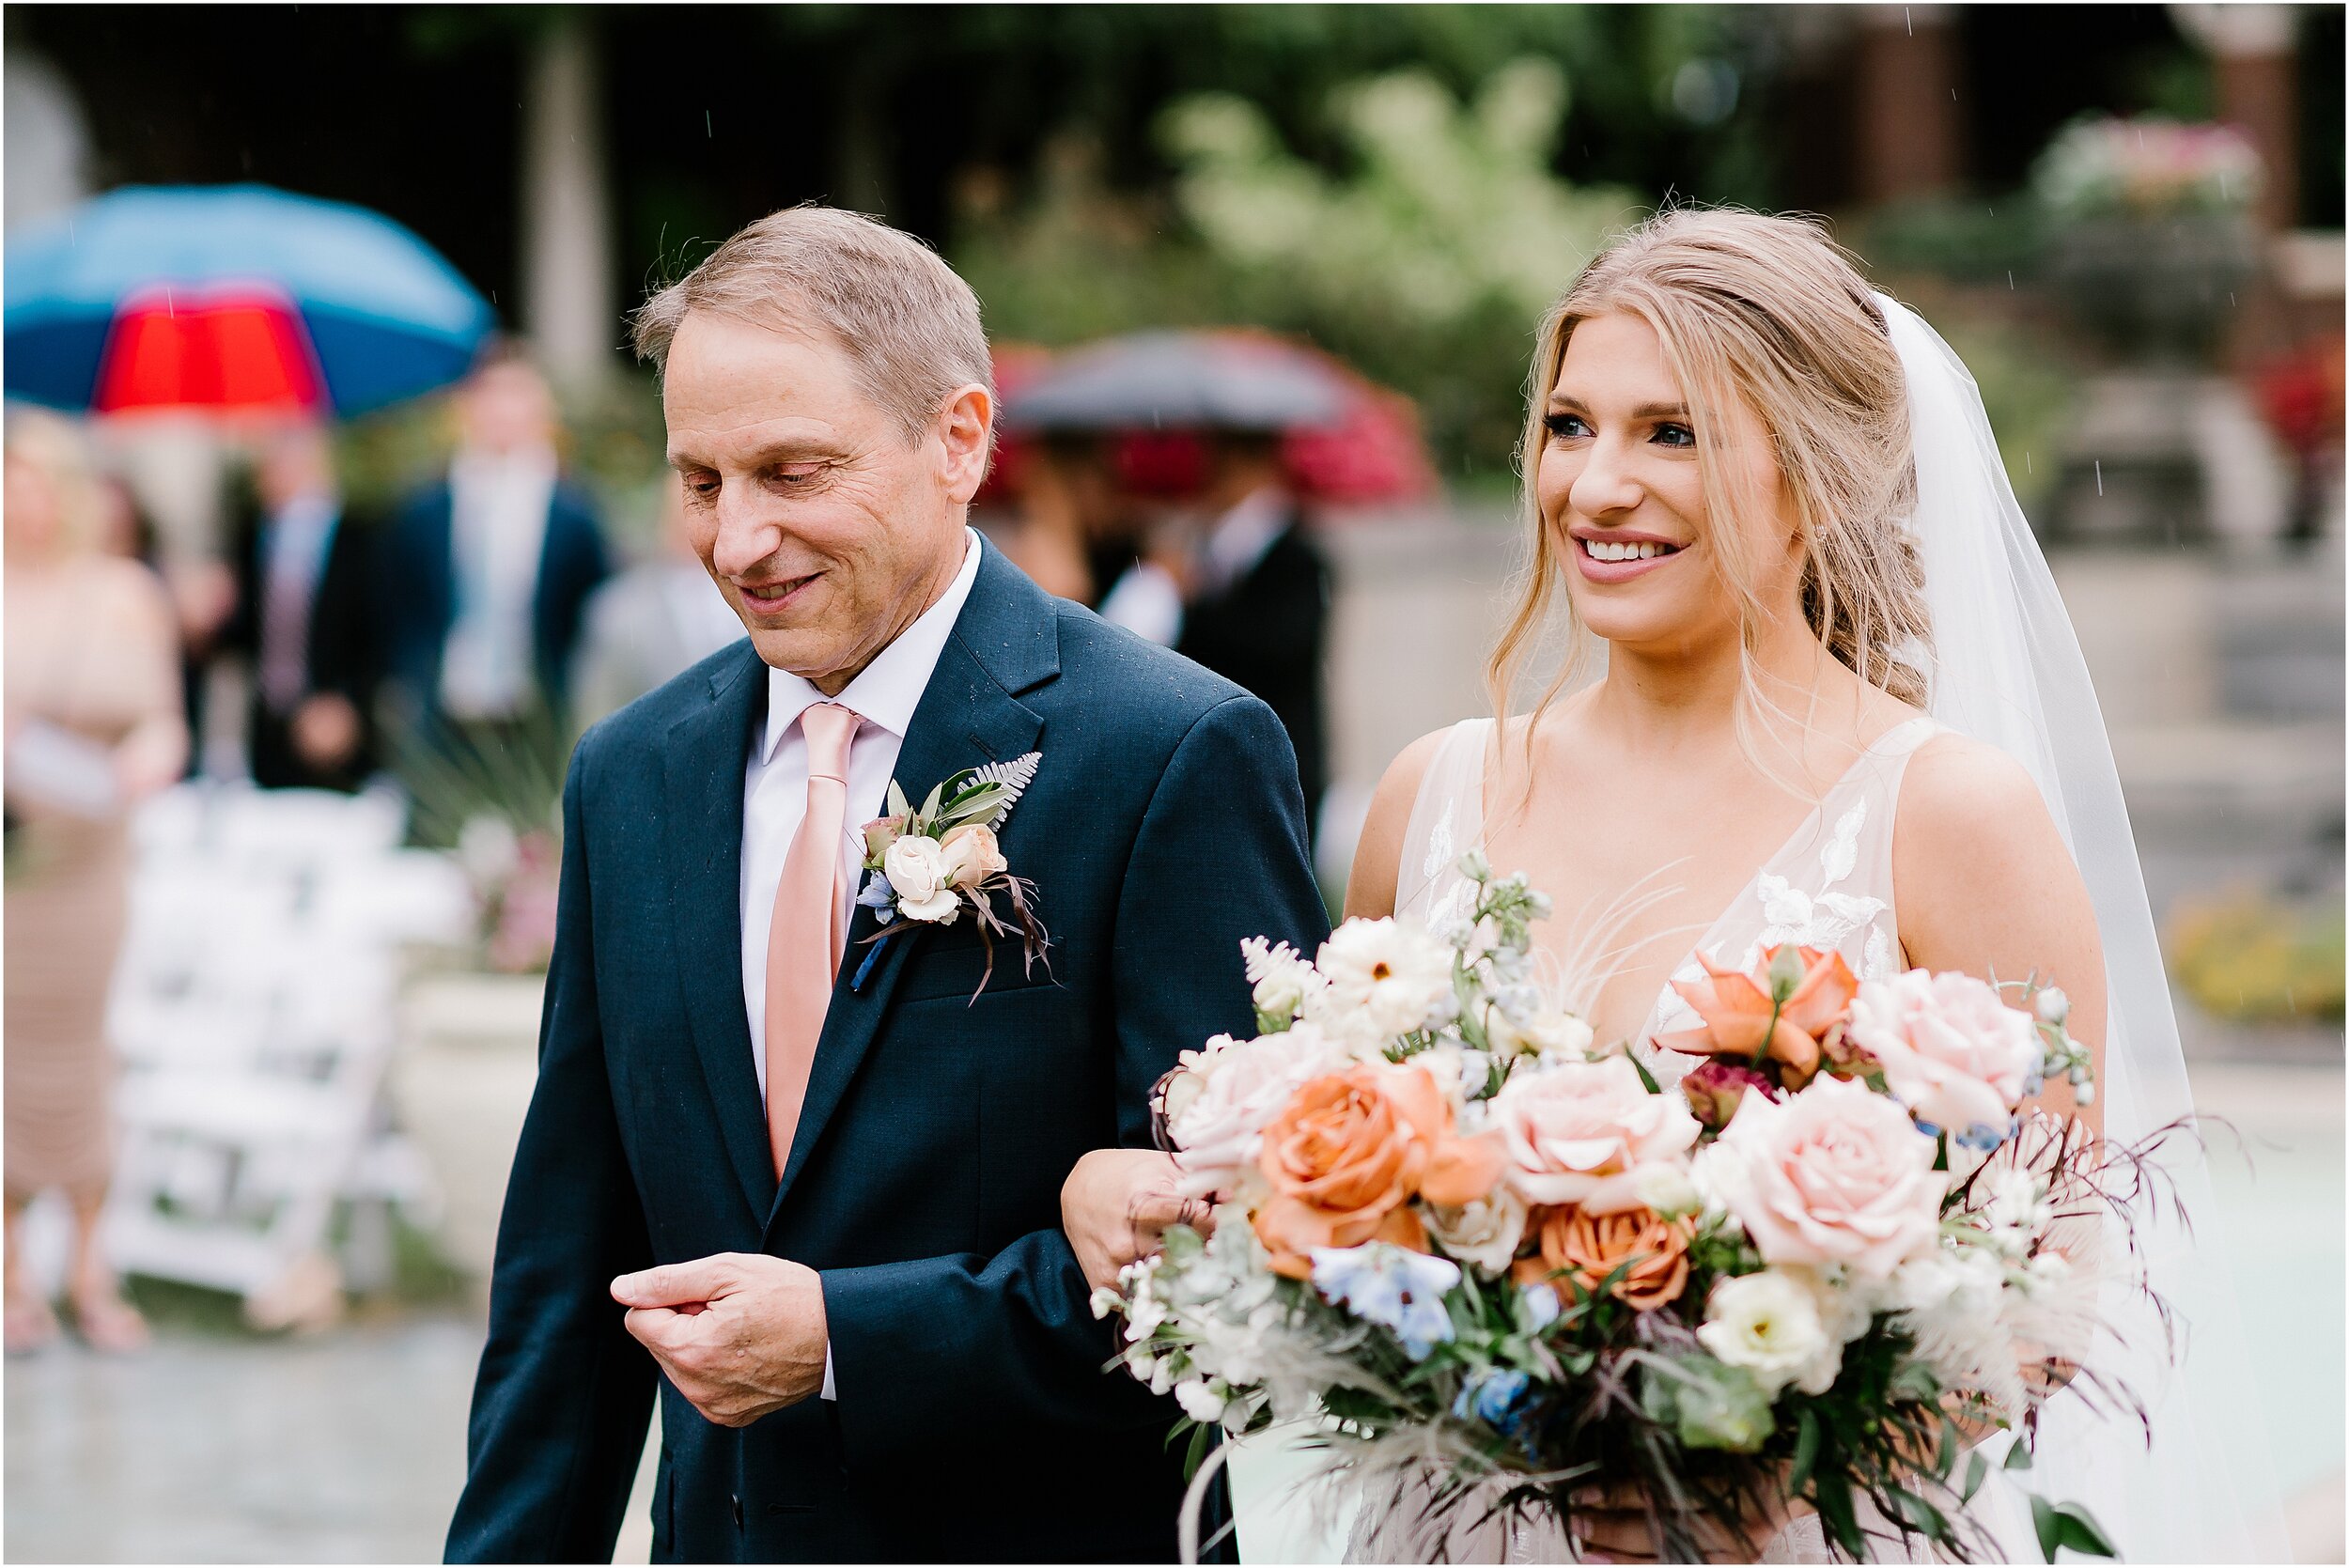 Rebecca Shehorn Photography Colleen and Kyle Inn at Irwin Gardens Wedding-505_The Commons Columbus Inn at Irwin Garden Indianapolis Wedding Photographer.jpg